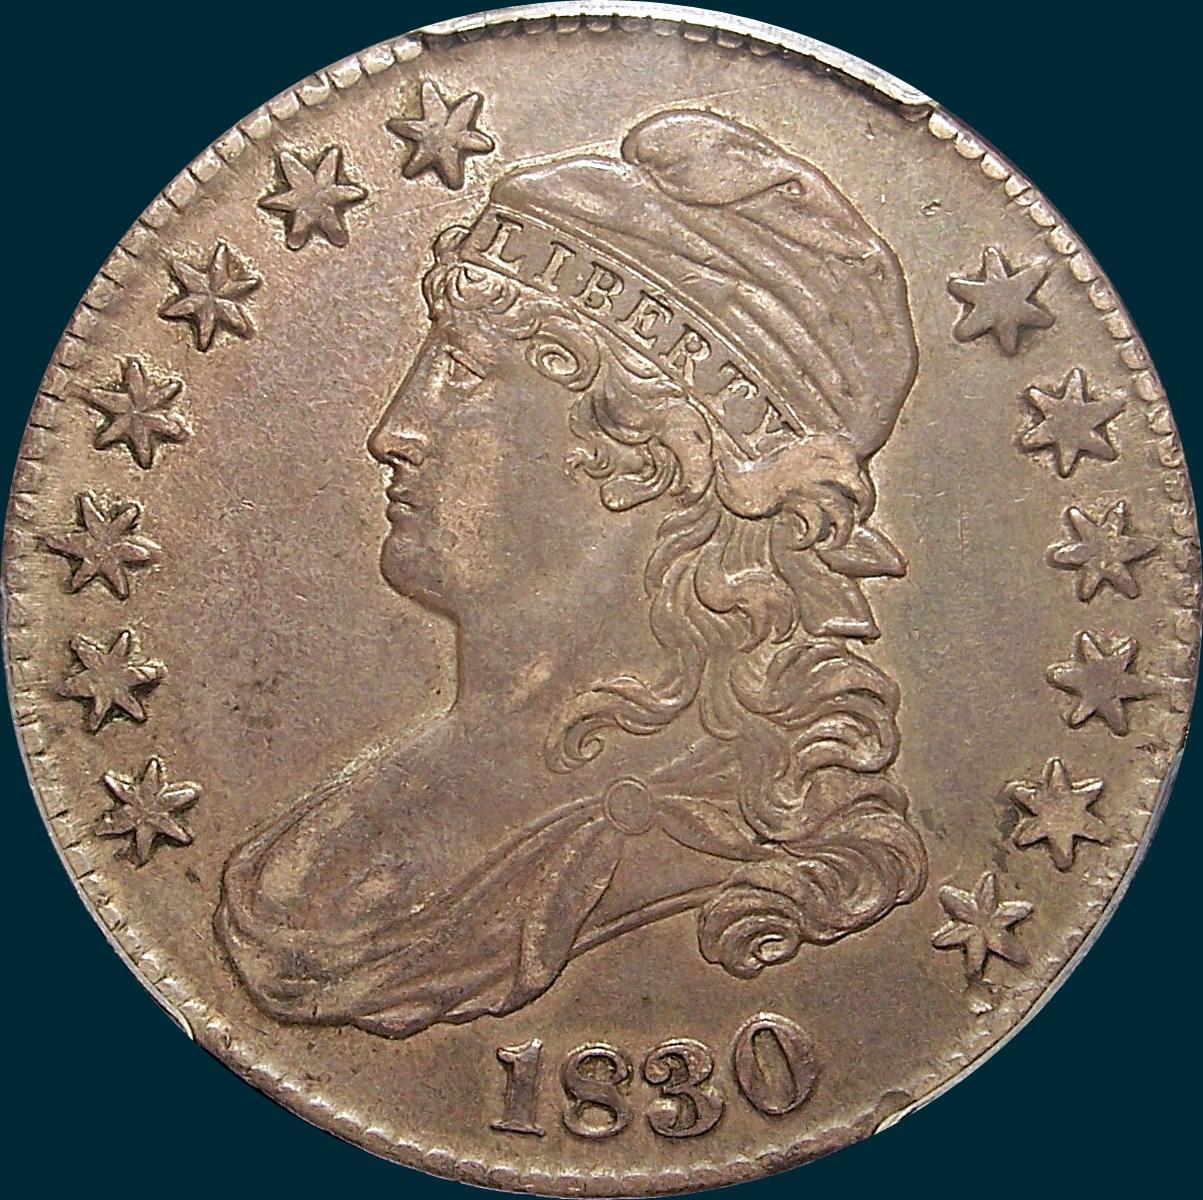 1830 O-122, large 0, capped bust half dollar